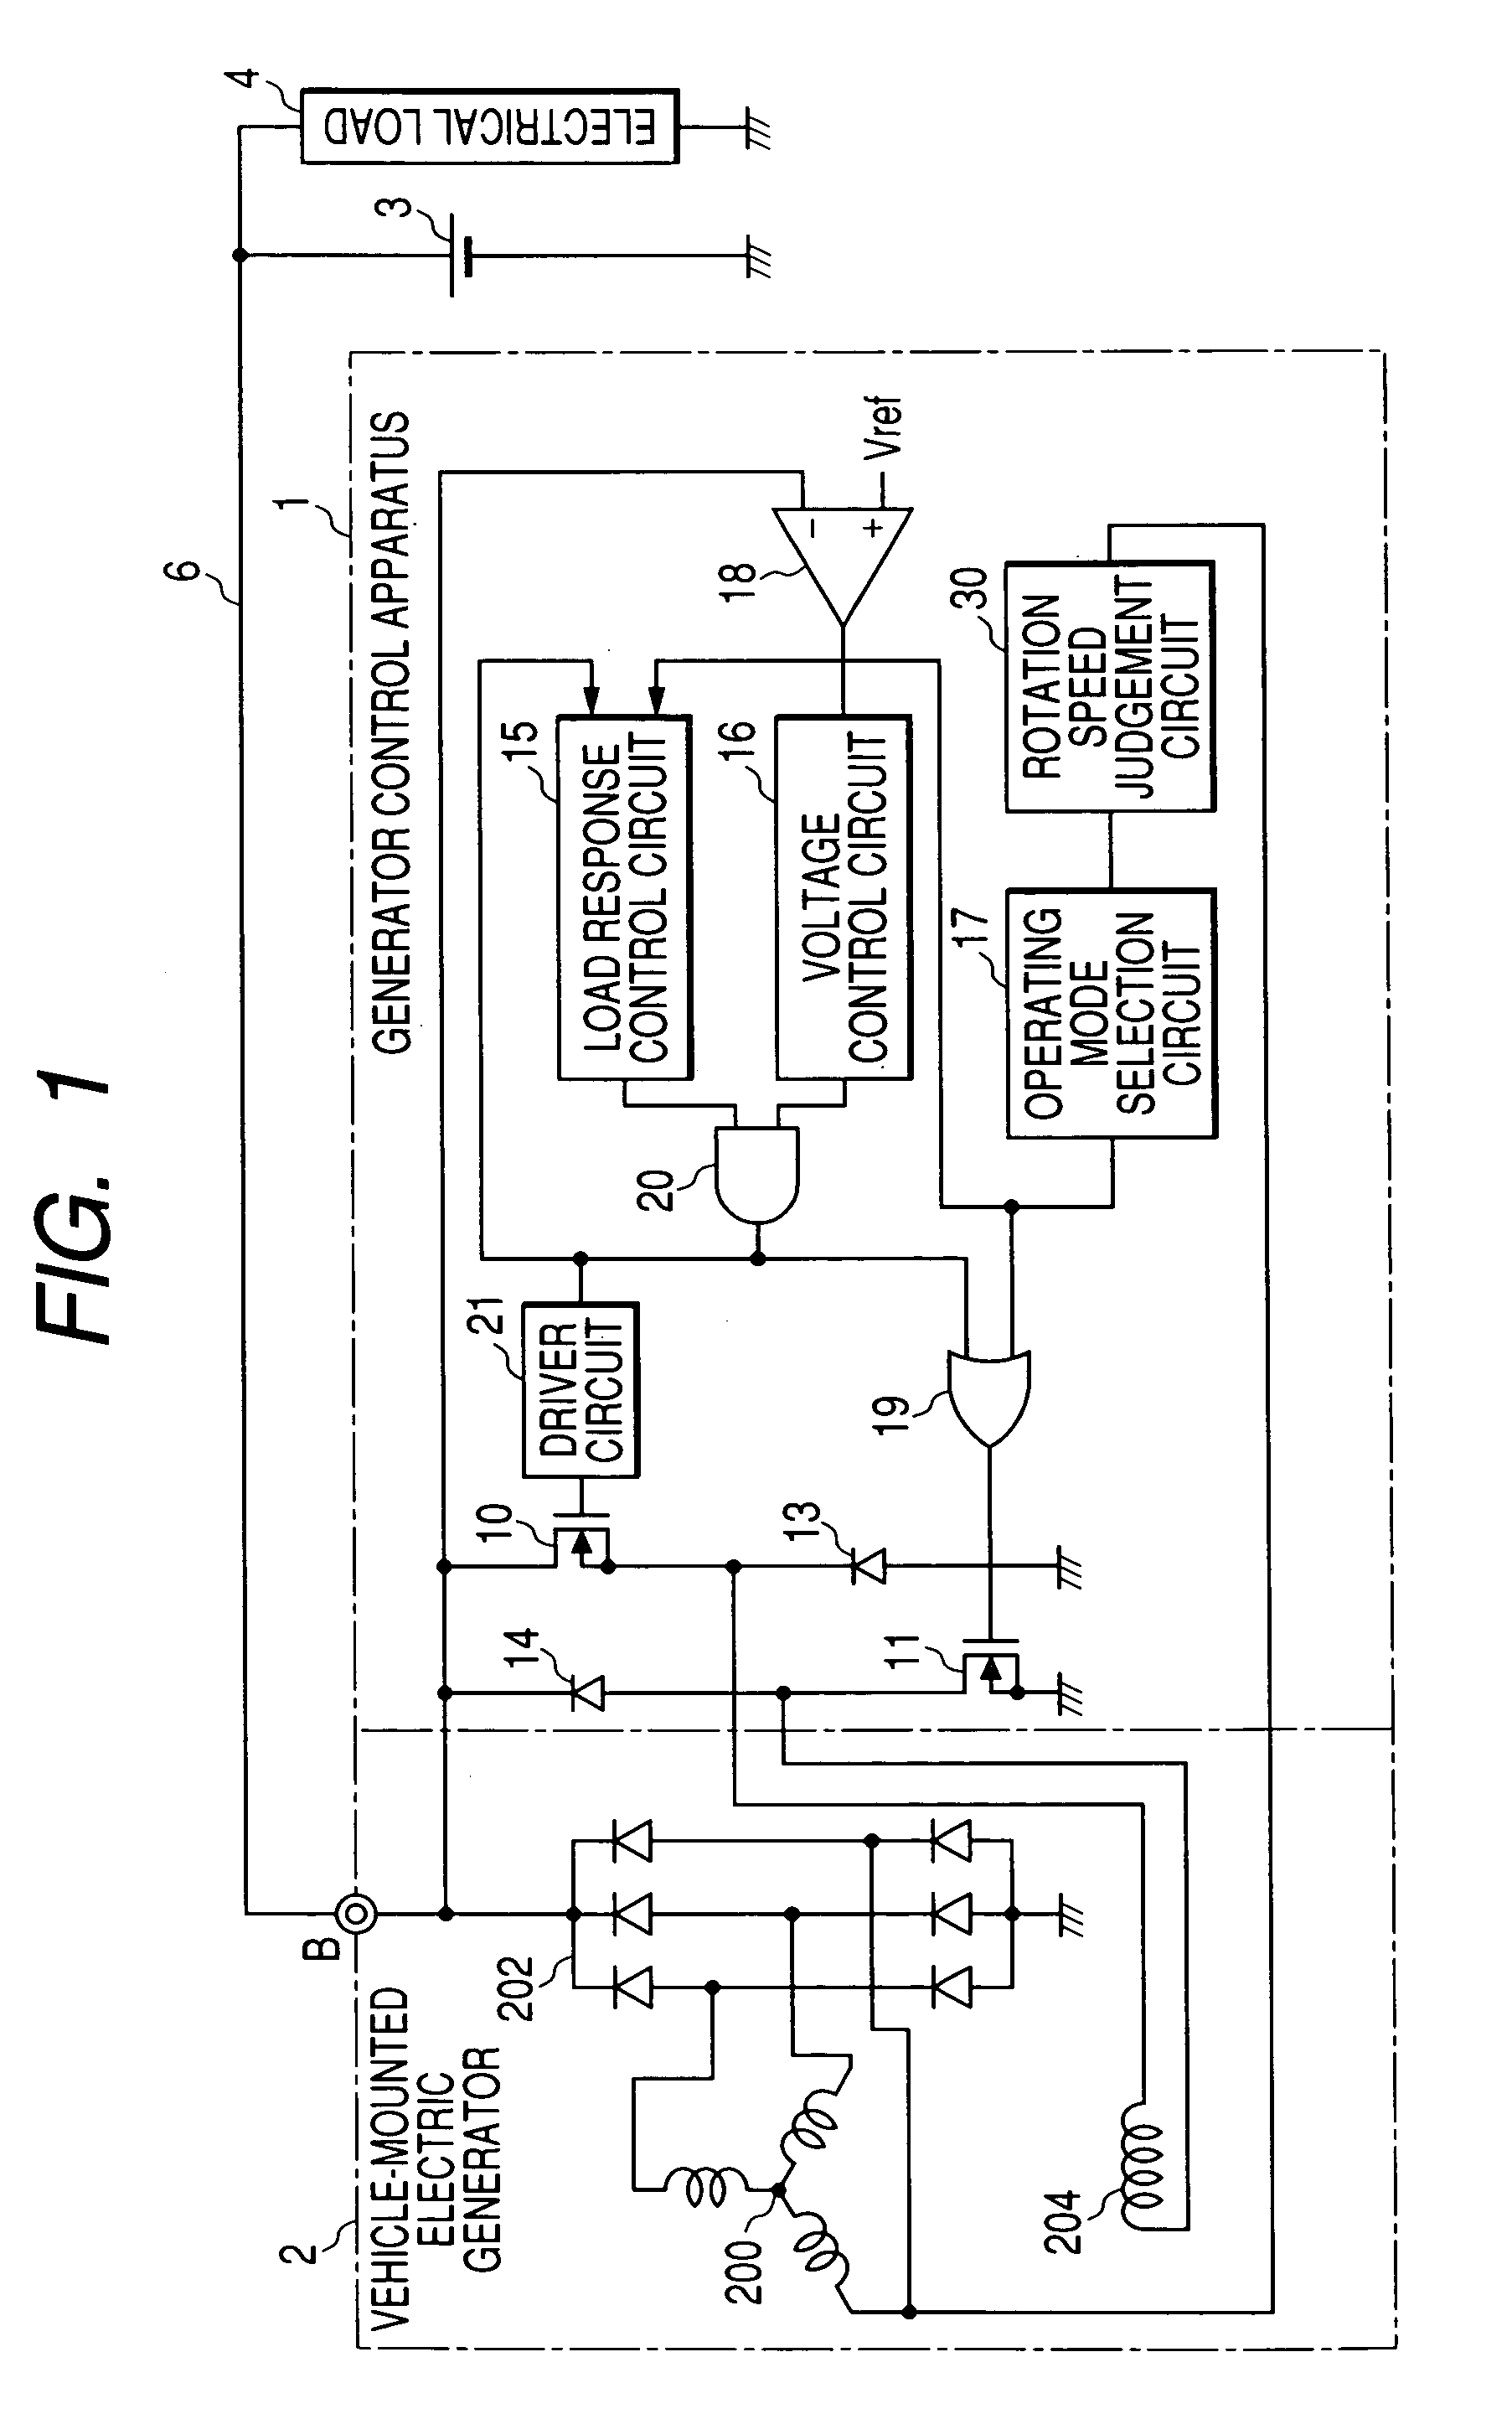 Vehicle-mounted electric generator control system which selectively supplies regenerative field current to battery in accordance with currently available generating capacity